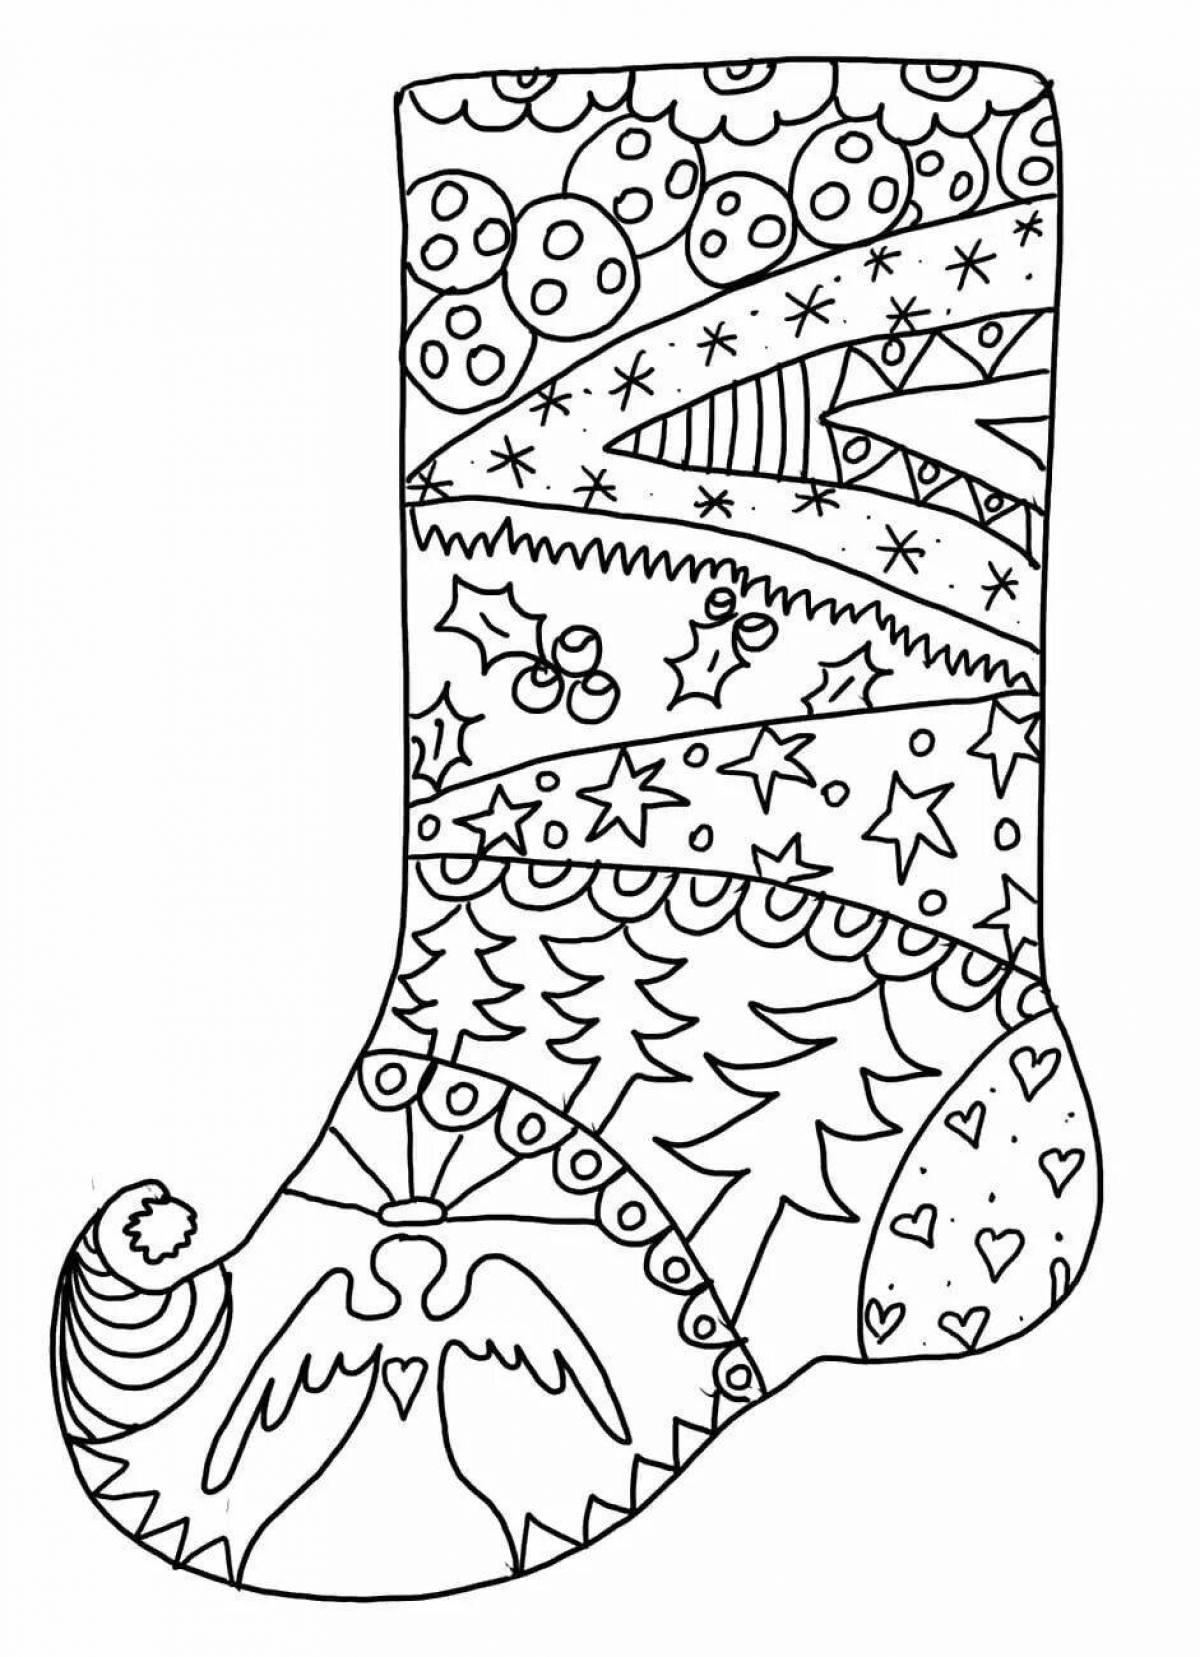 Amazing boots coloring page